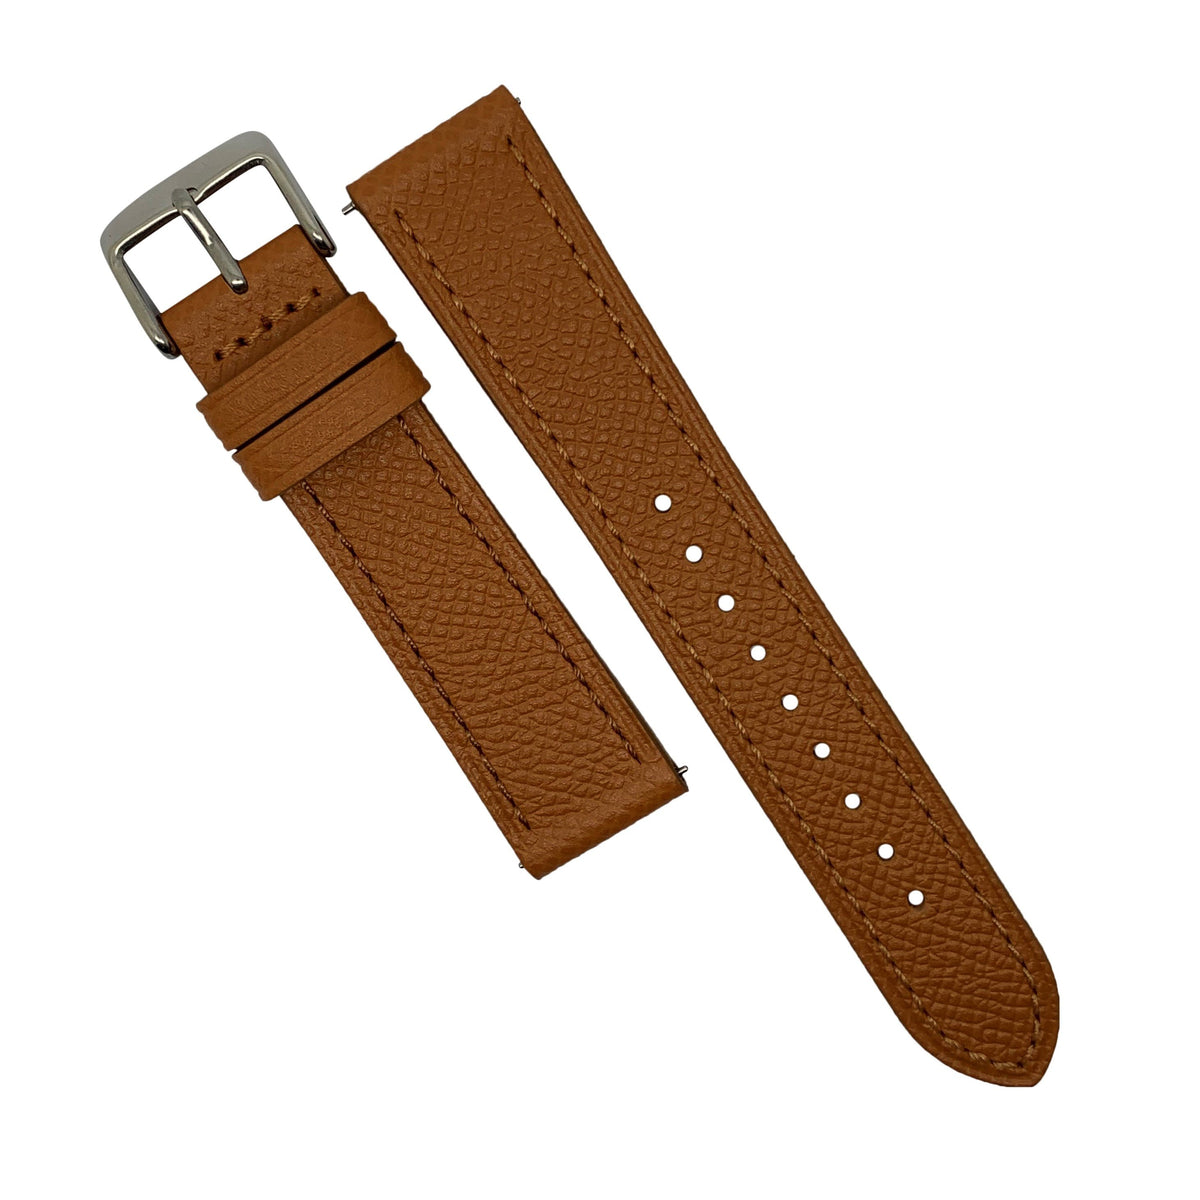 Emery Dress Epsom Leather Strap in Tan (20mm) - Nomad Watch Works Malaysia